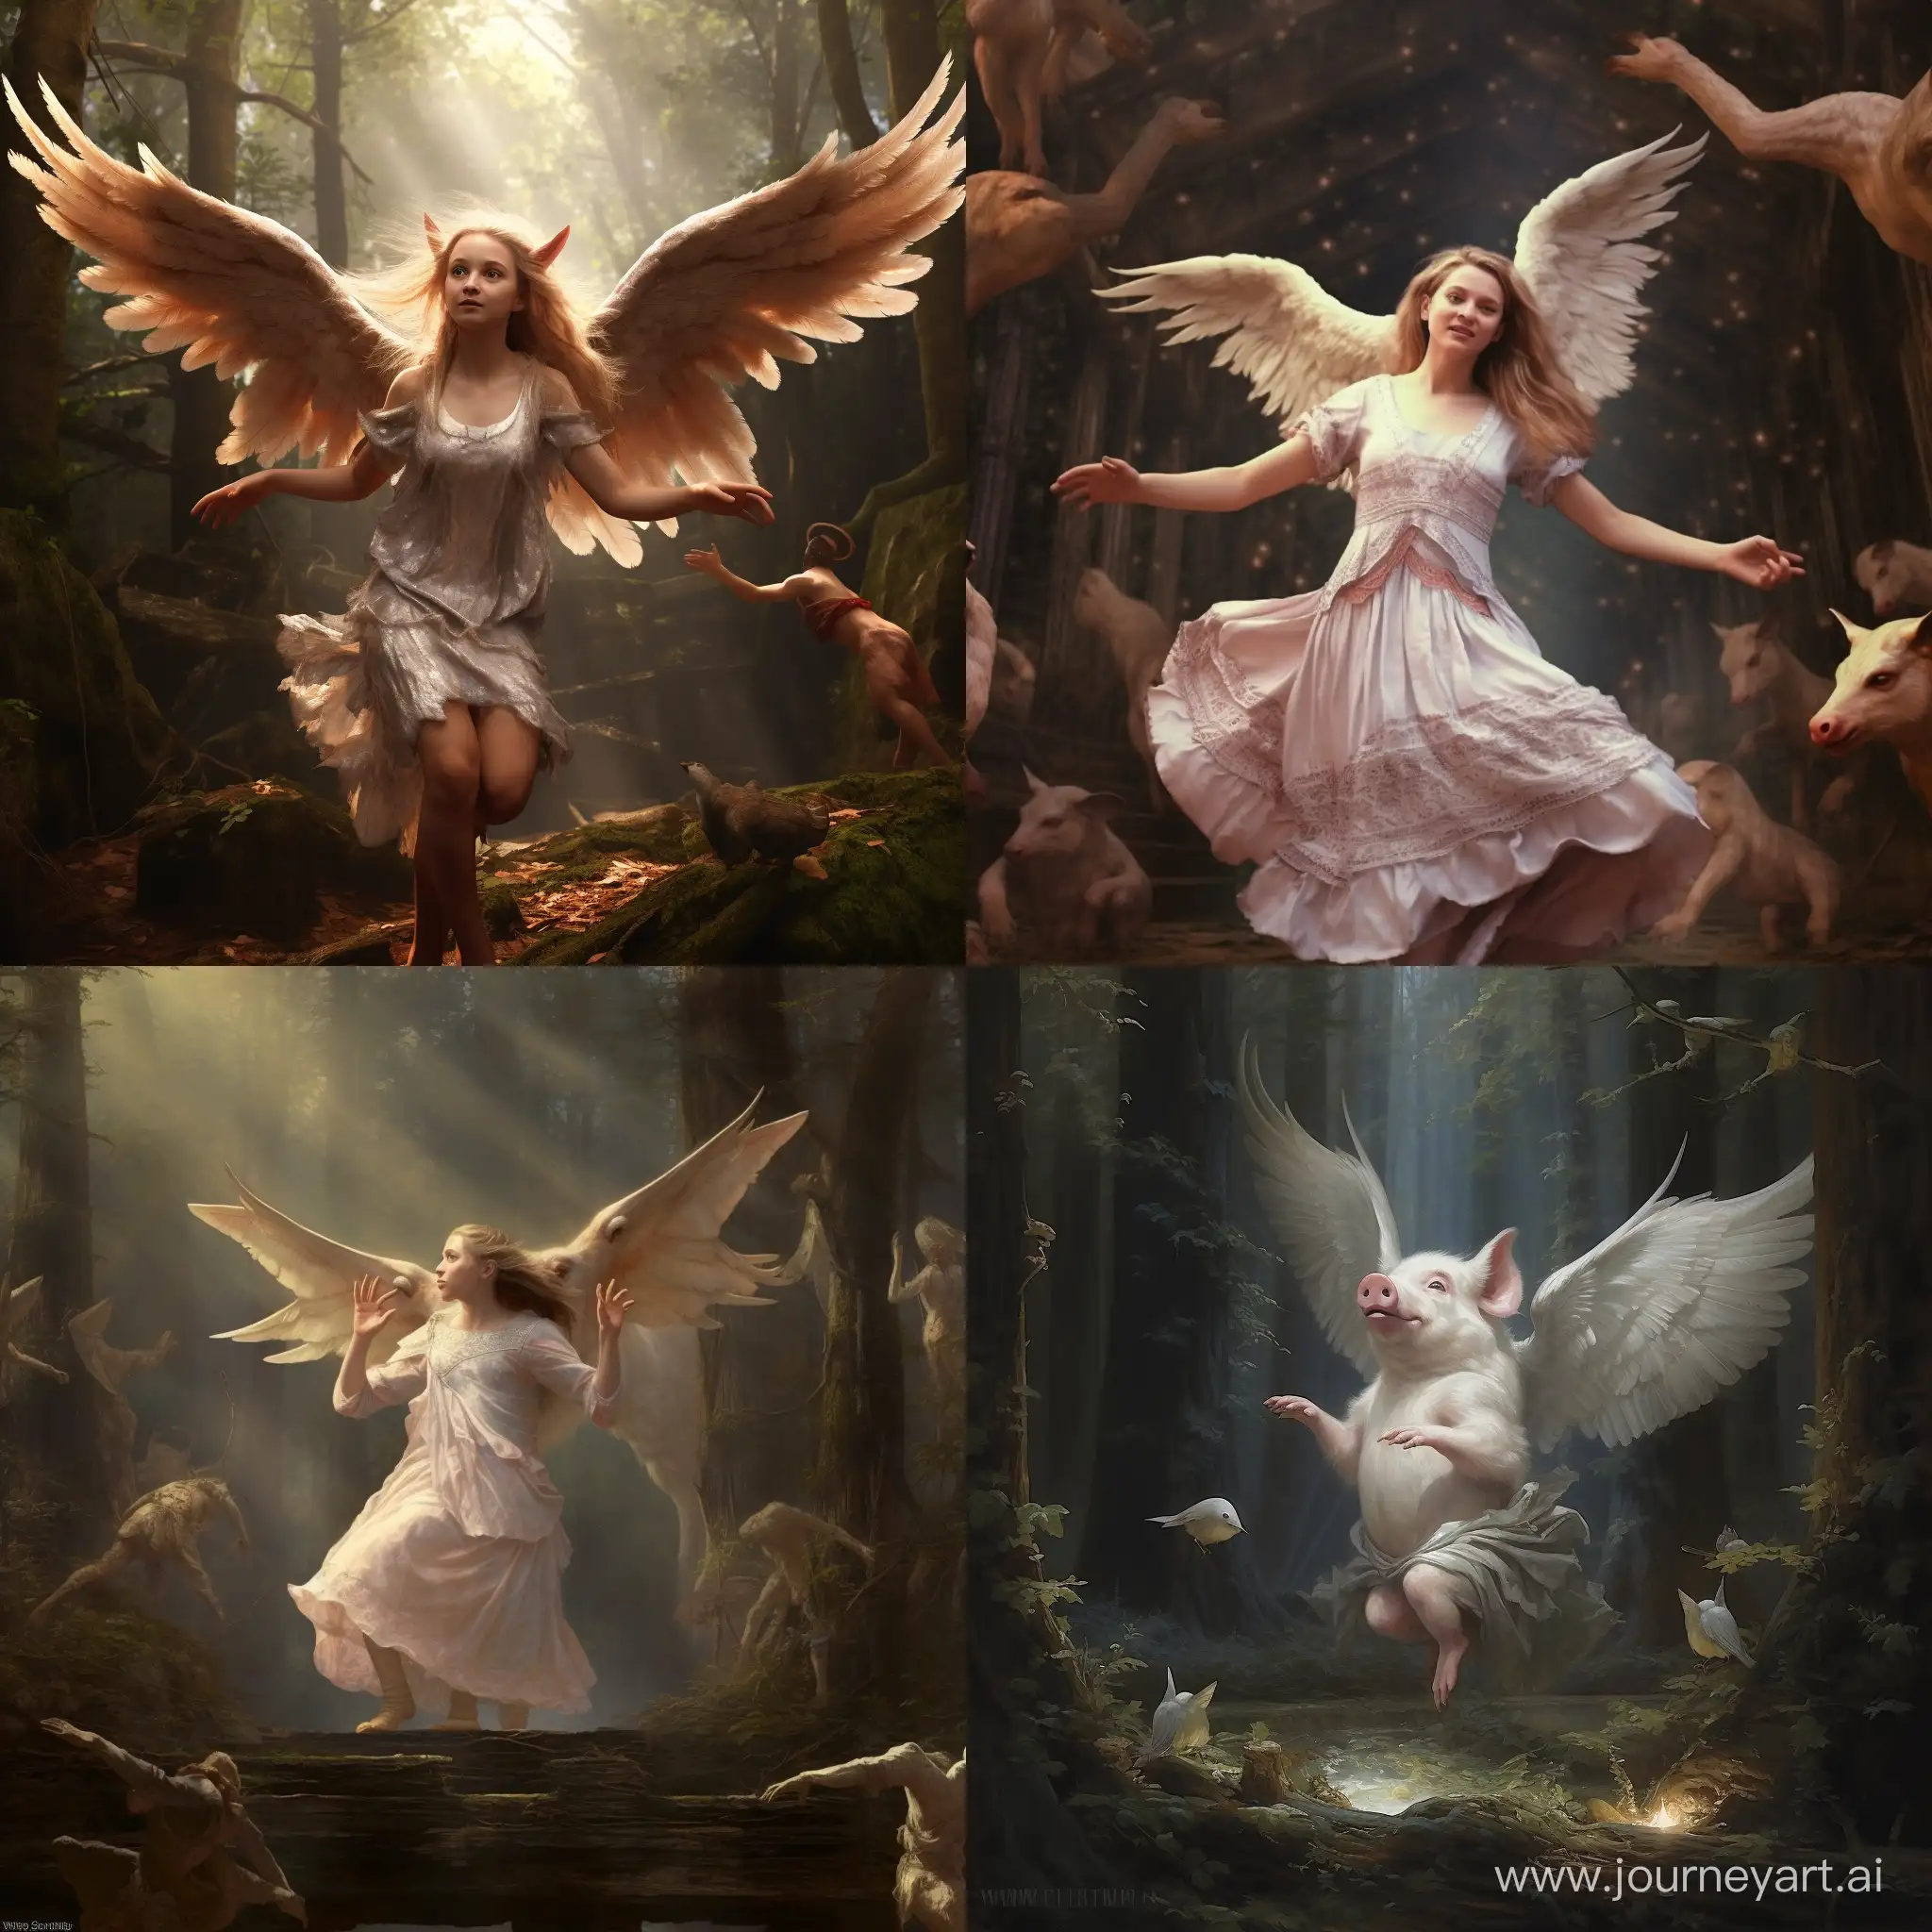 Enchanting-Forest-Dance-Angelic-Performance-Amidst-Watchful-Pigs